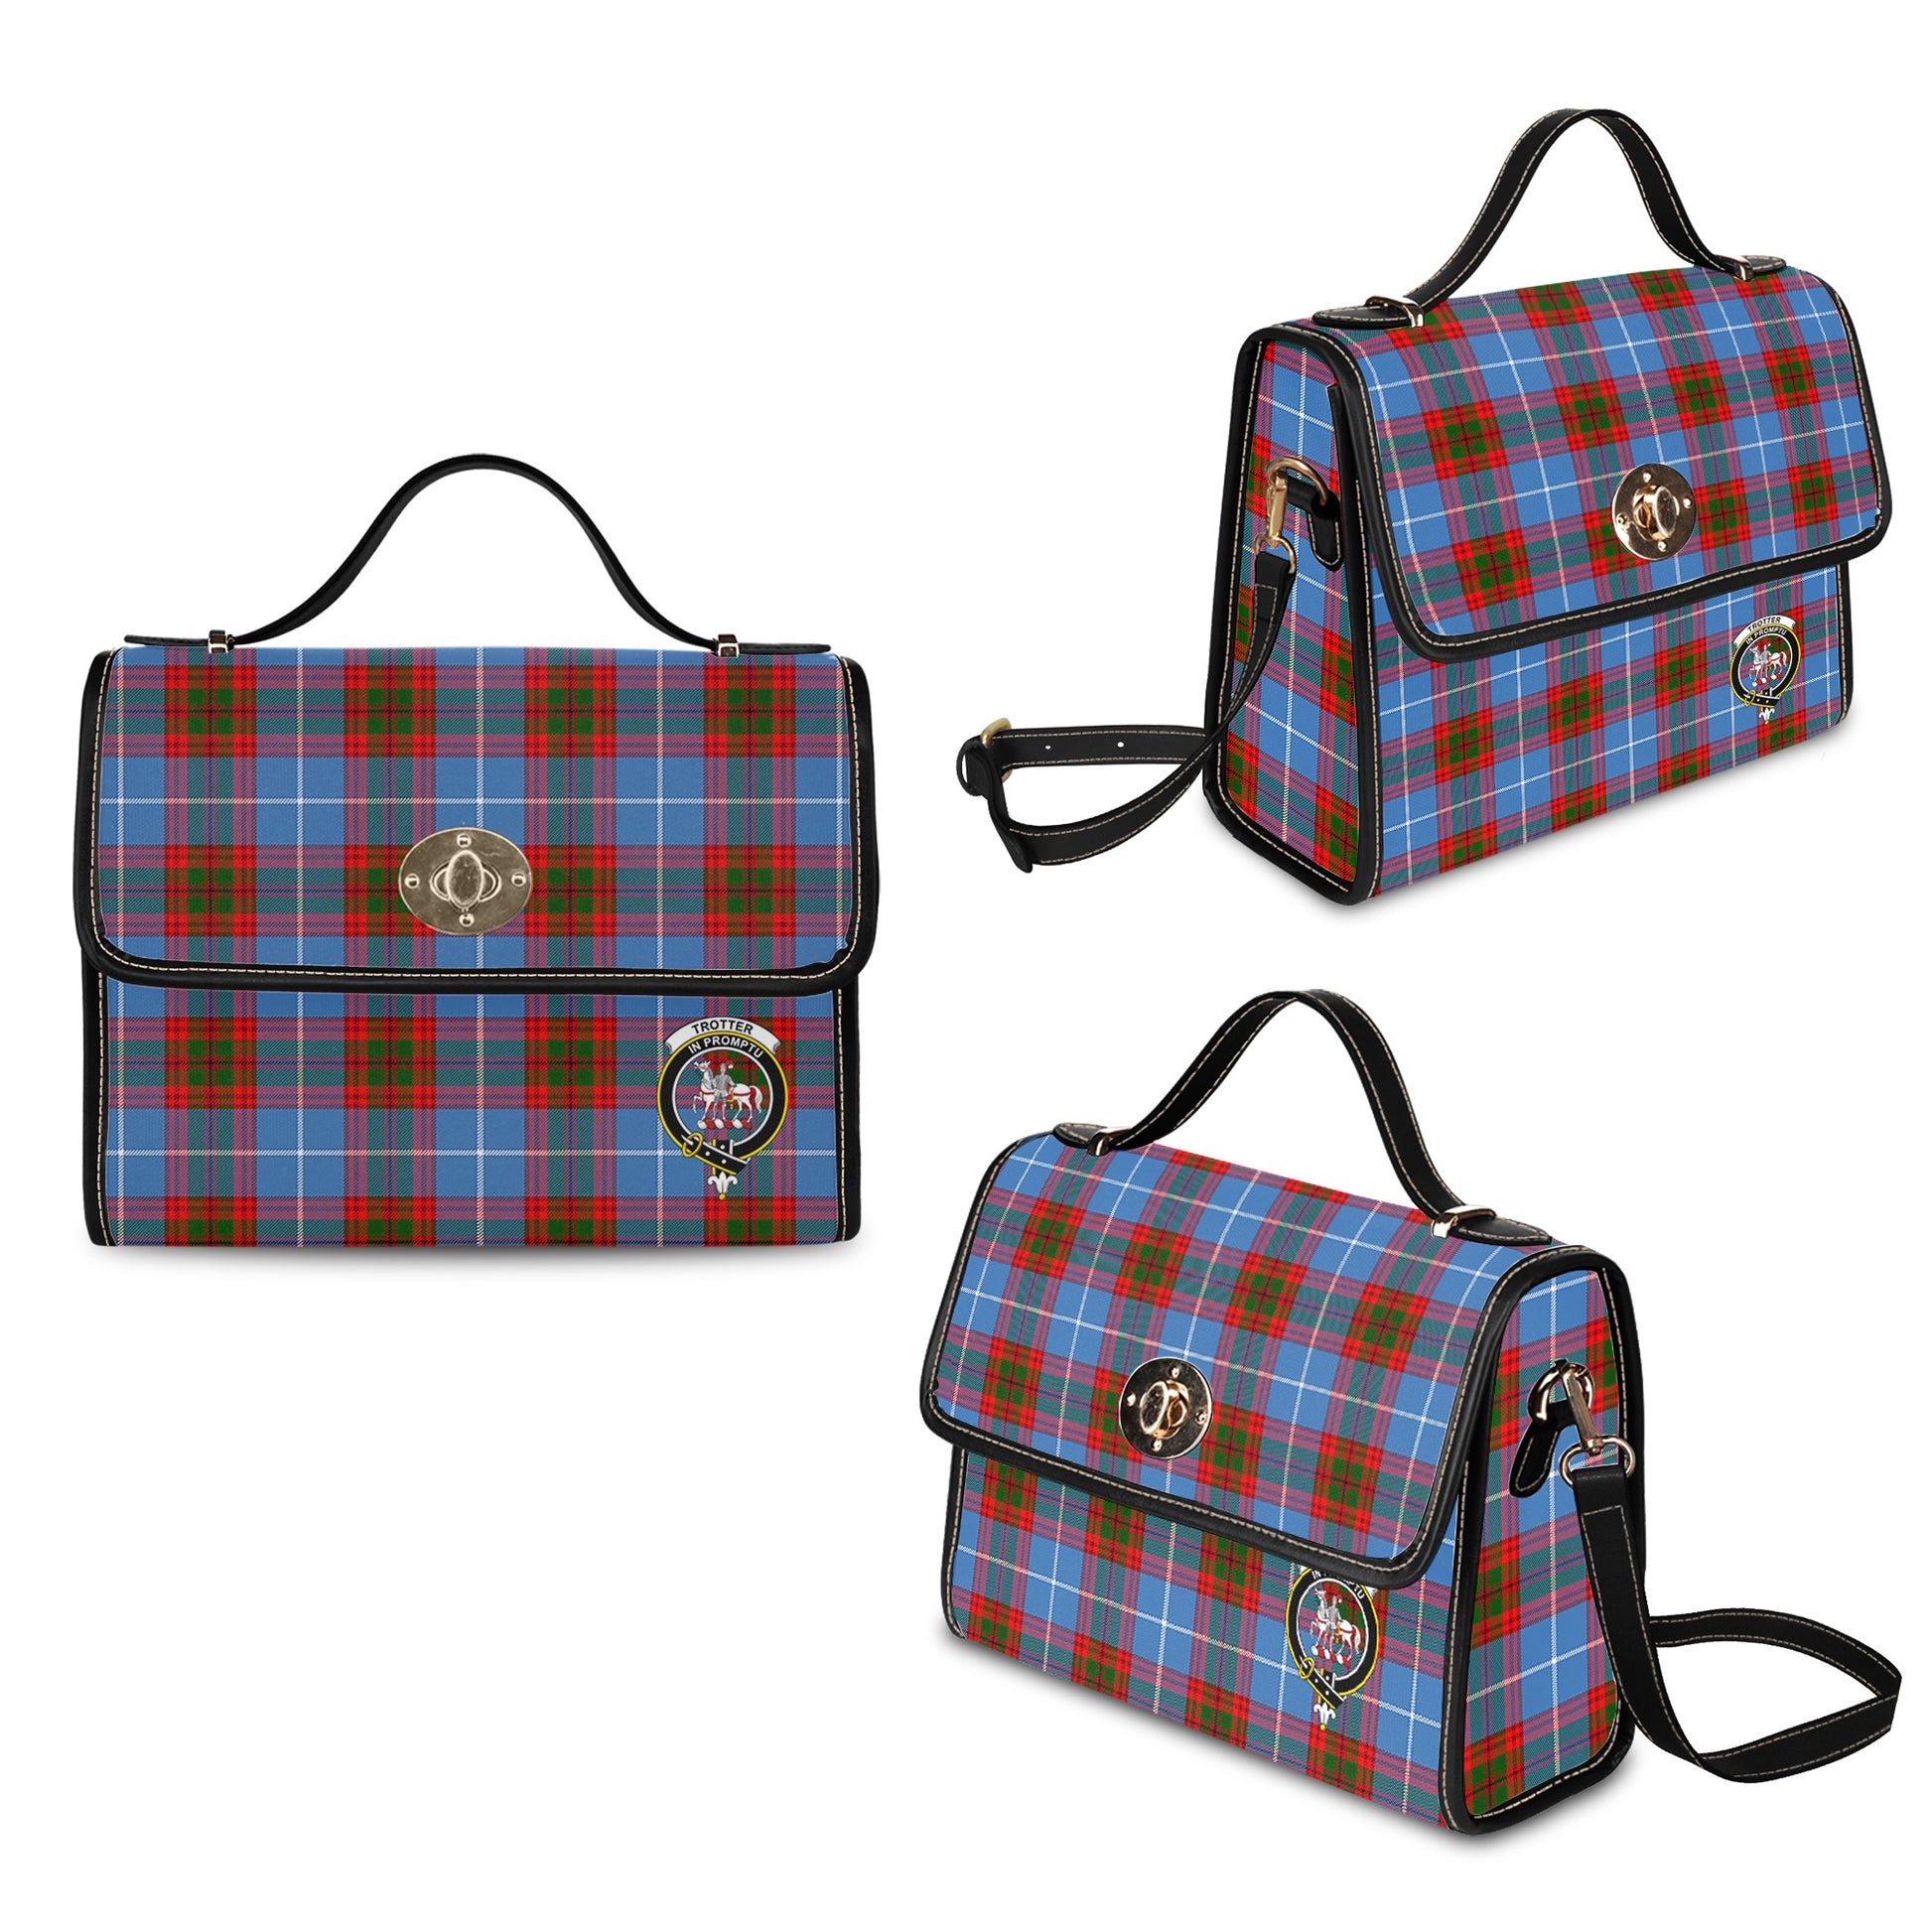 trotter-tartan-leather-strap-waterproof-canvas-bag-with-family-crest